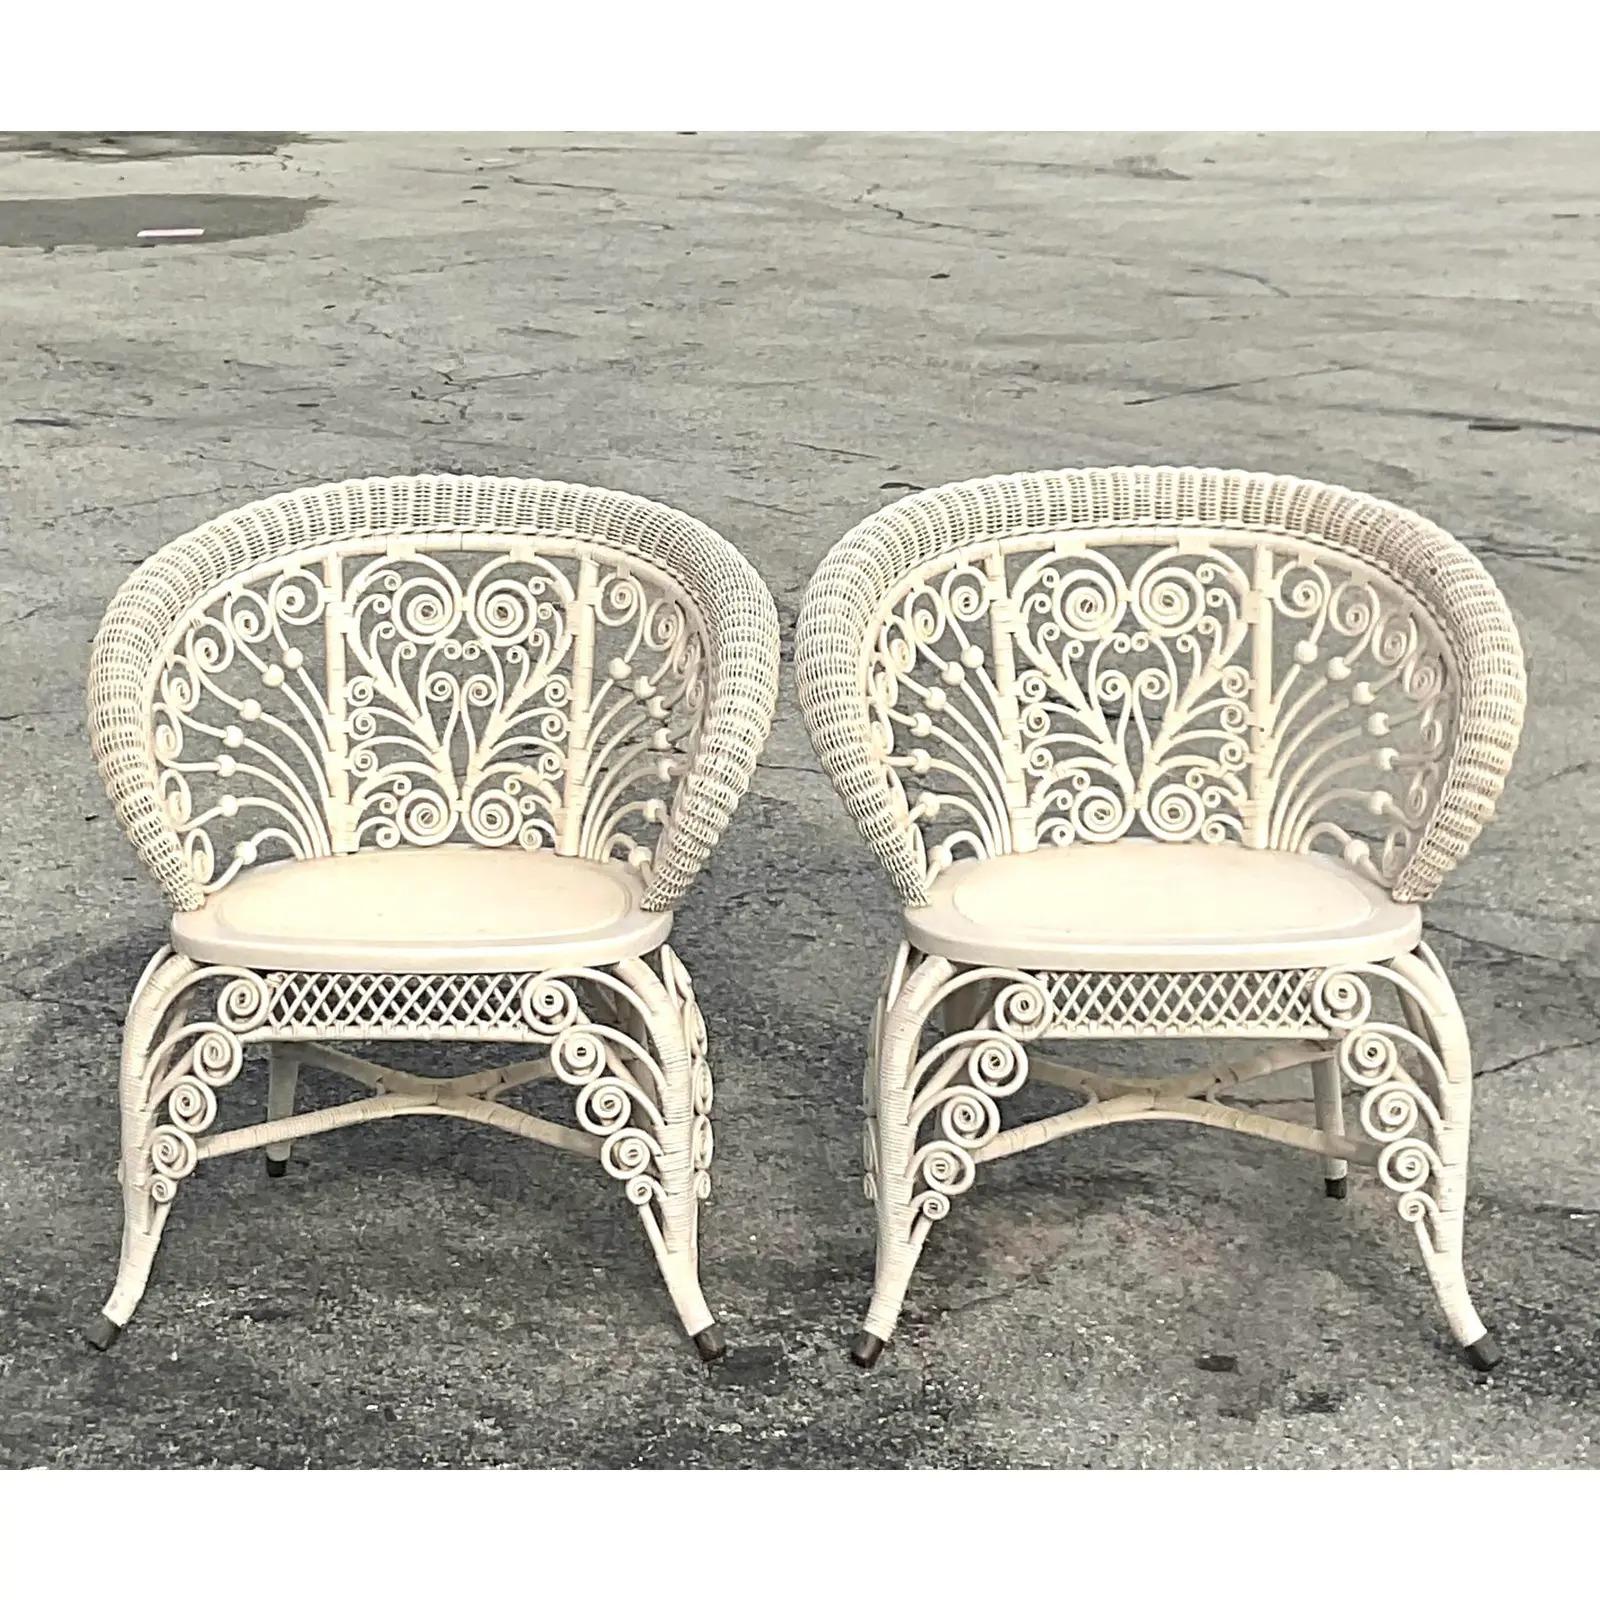 A fabulous pair of vintage MCM Coastal Fiddle-Roe chairs. Made by the iconic Heywood Wakefield group. Beautiful woven rattan in the classic swirl design. Original tag on the bottom of one of the chairs. Acquired from a Palm Beach estate.